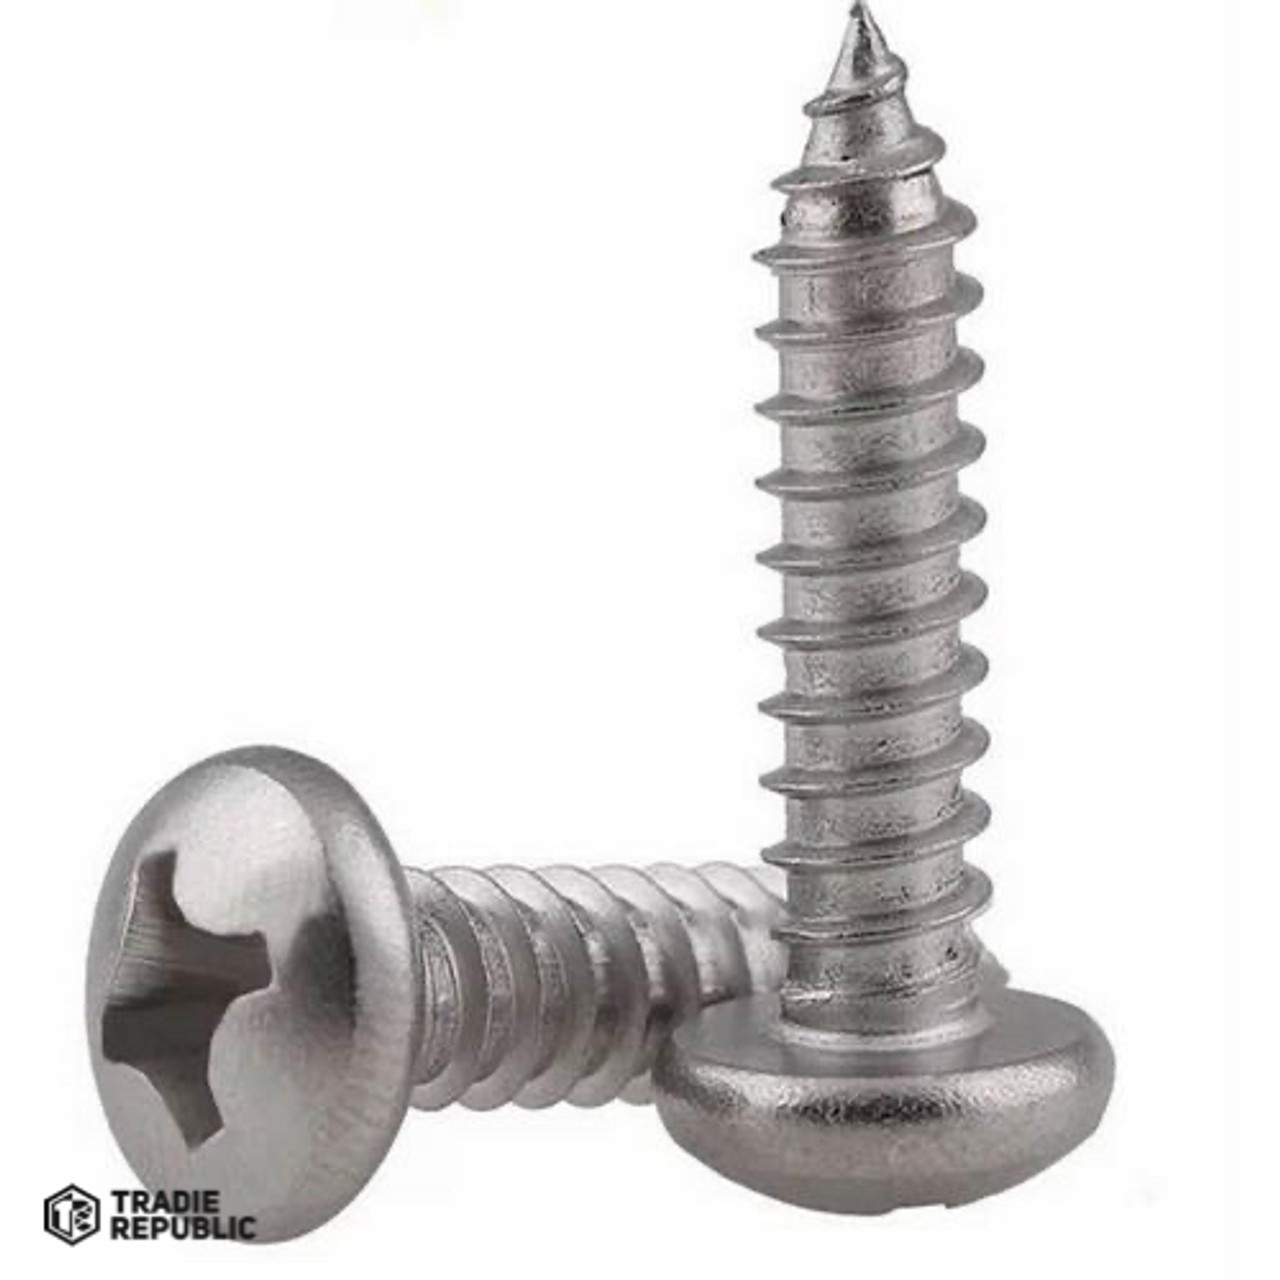 SSCKPANPHSDS03008L SS 304 Pan Head Phillips Self Tapping Screw (50 Pieces)